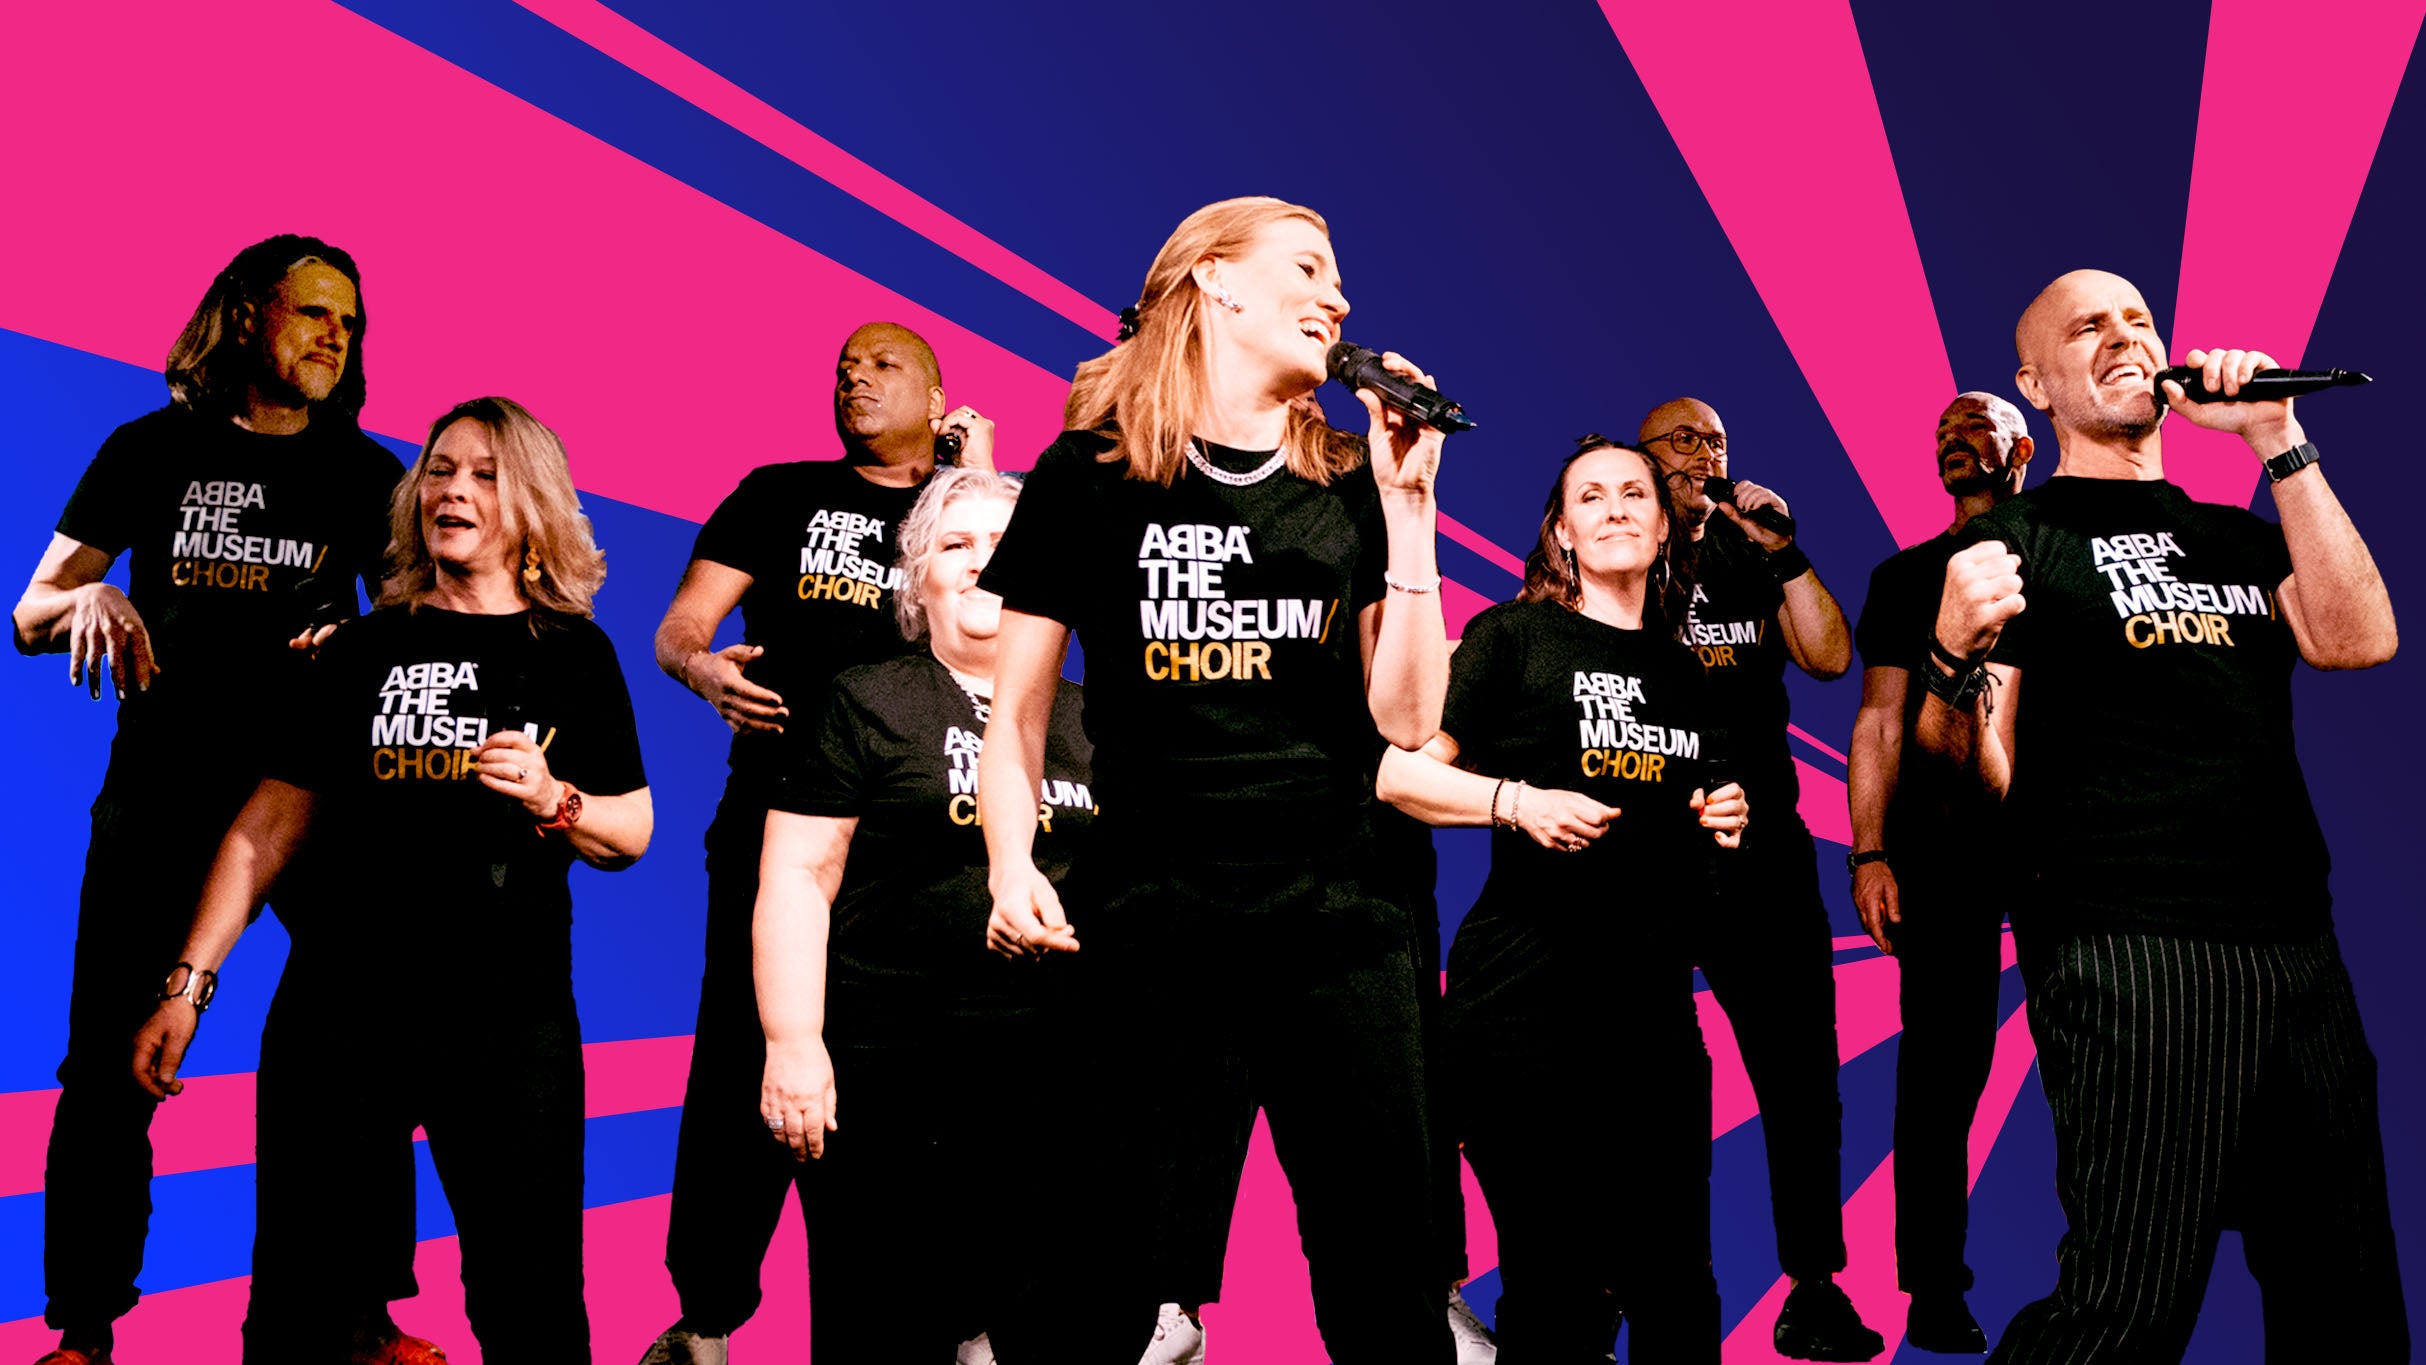 The Equality Project presents The Choir by ABBA The Museum in Melbourne promo photo for Exclusive presale offer code